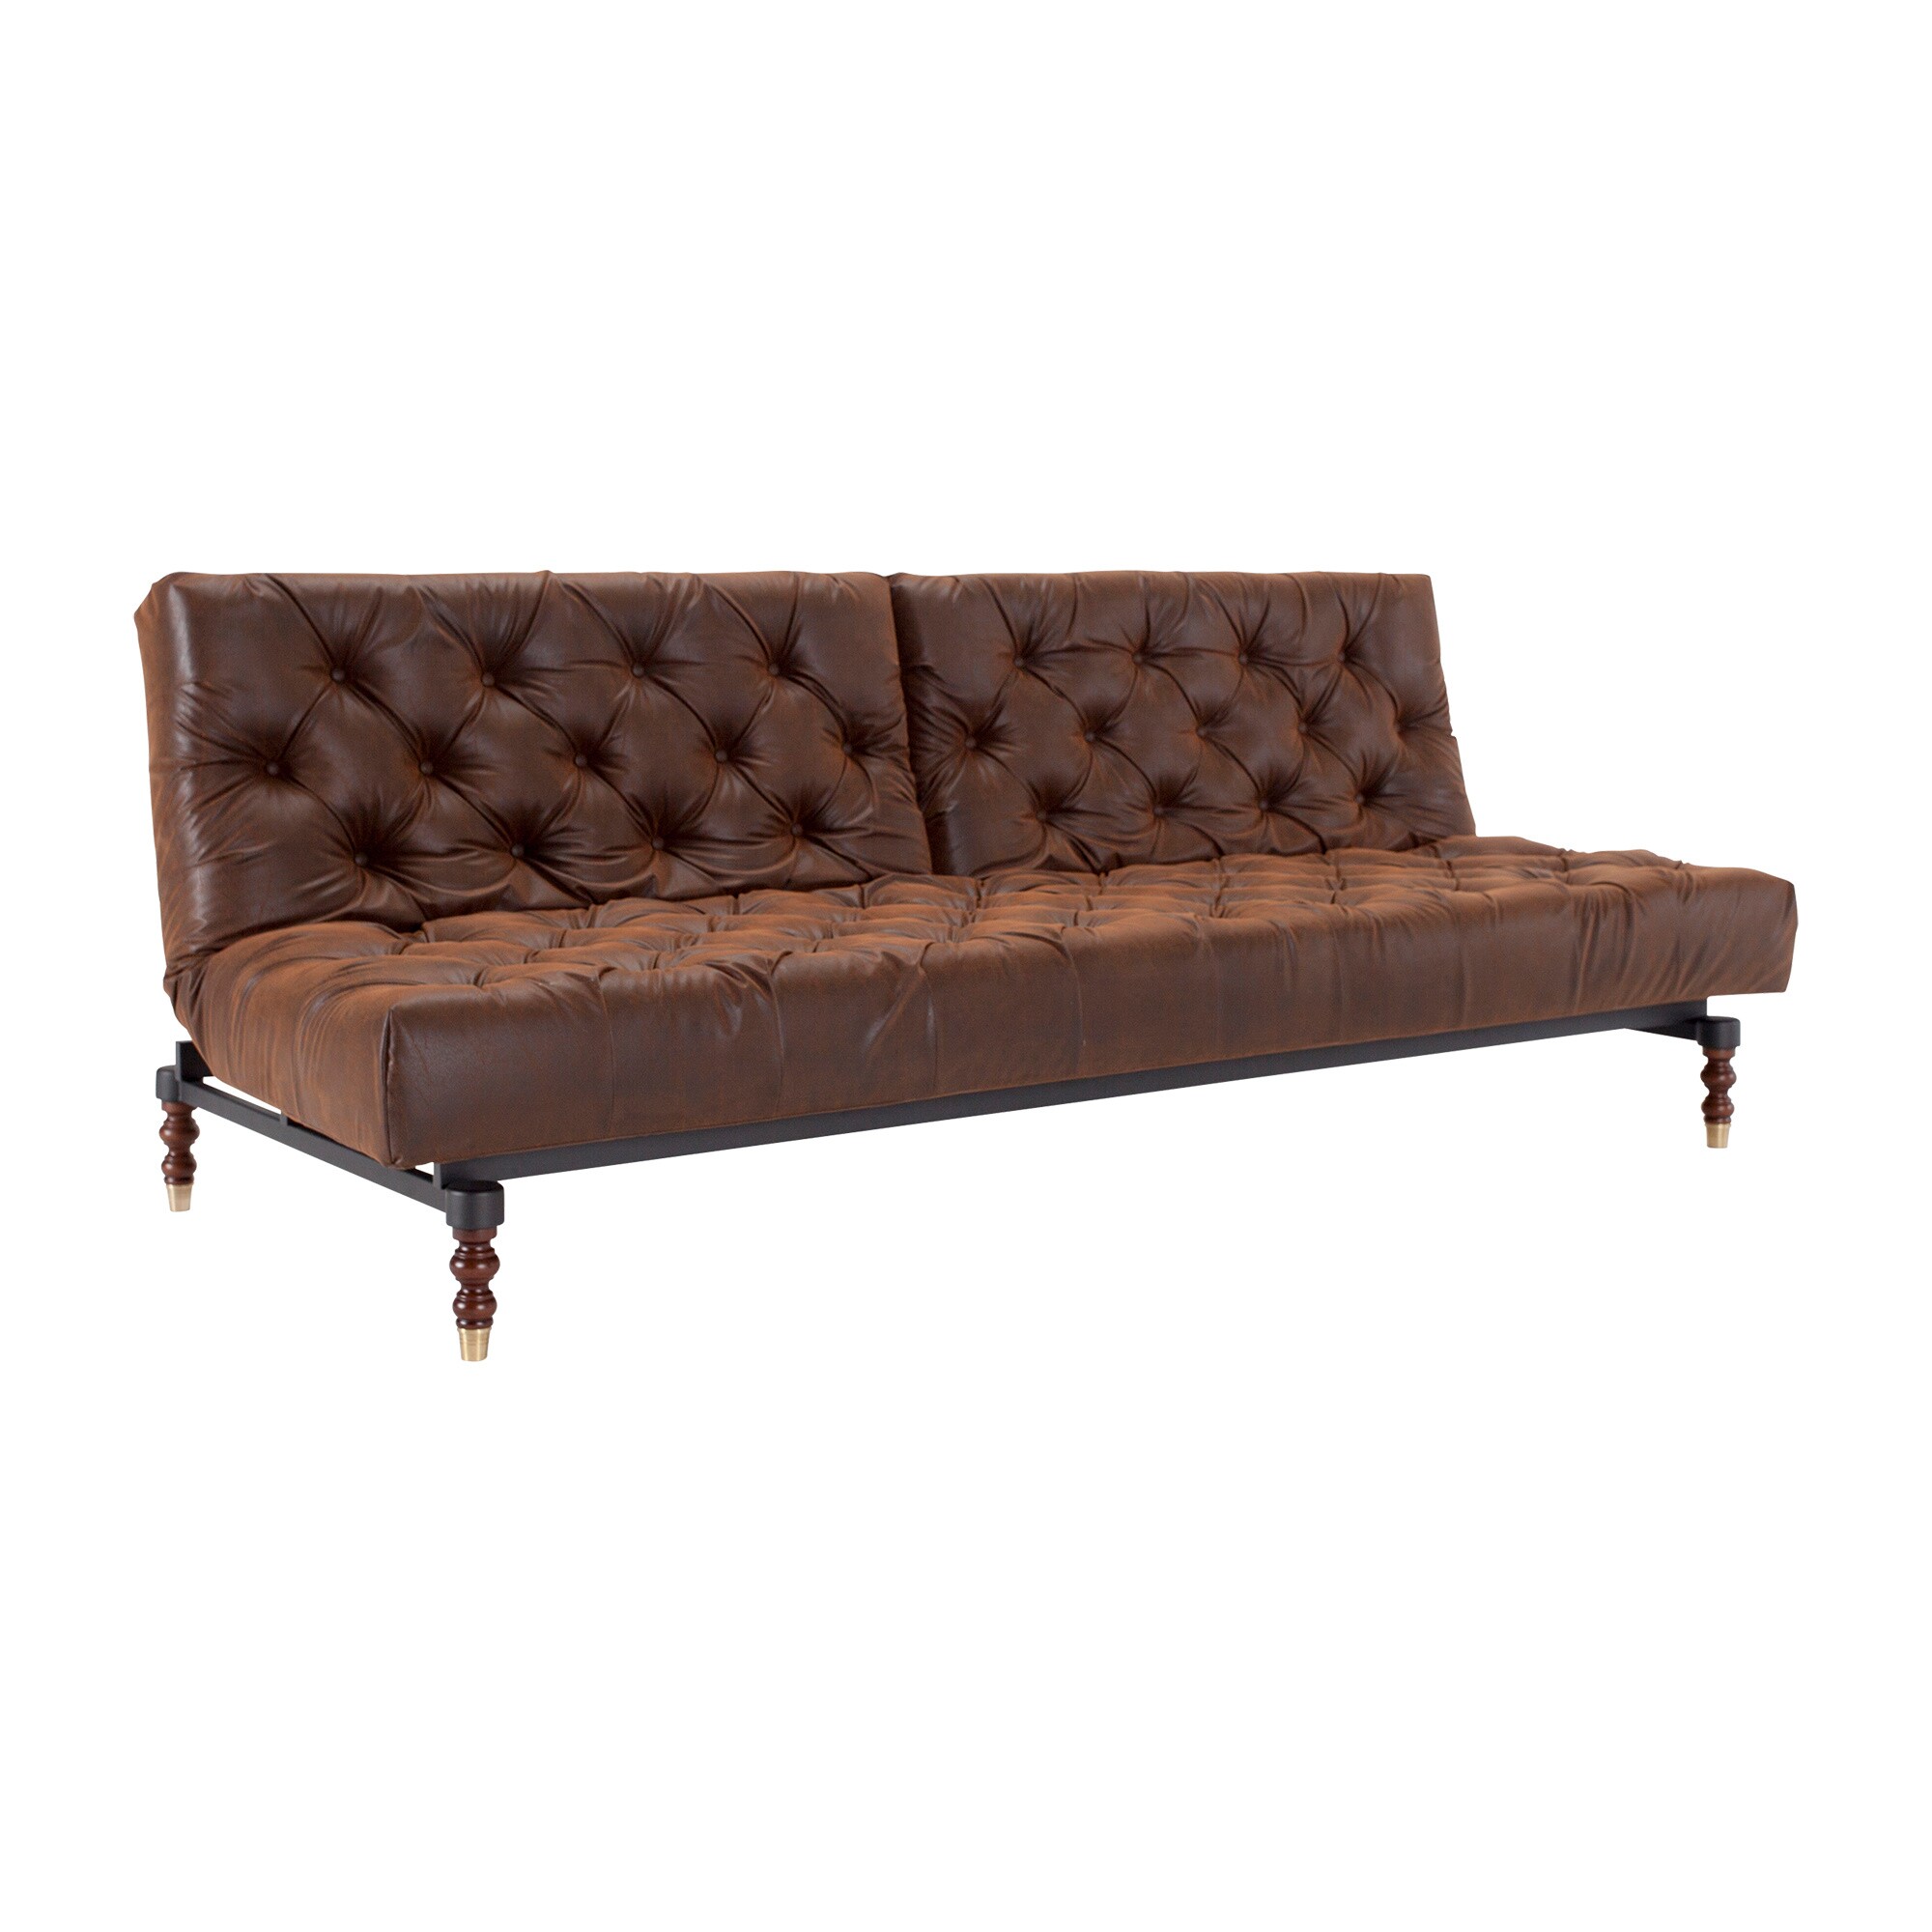 Innovation Oldschool Retro Sofa Bed, Brown Faux Leather Sofa Bed